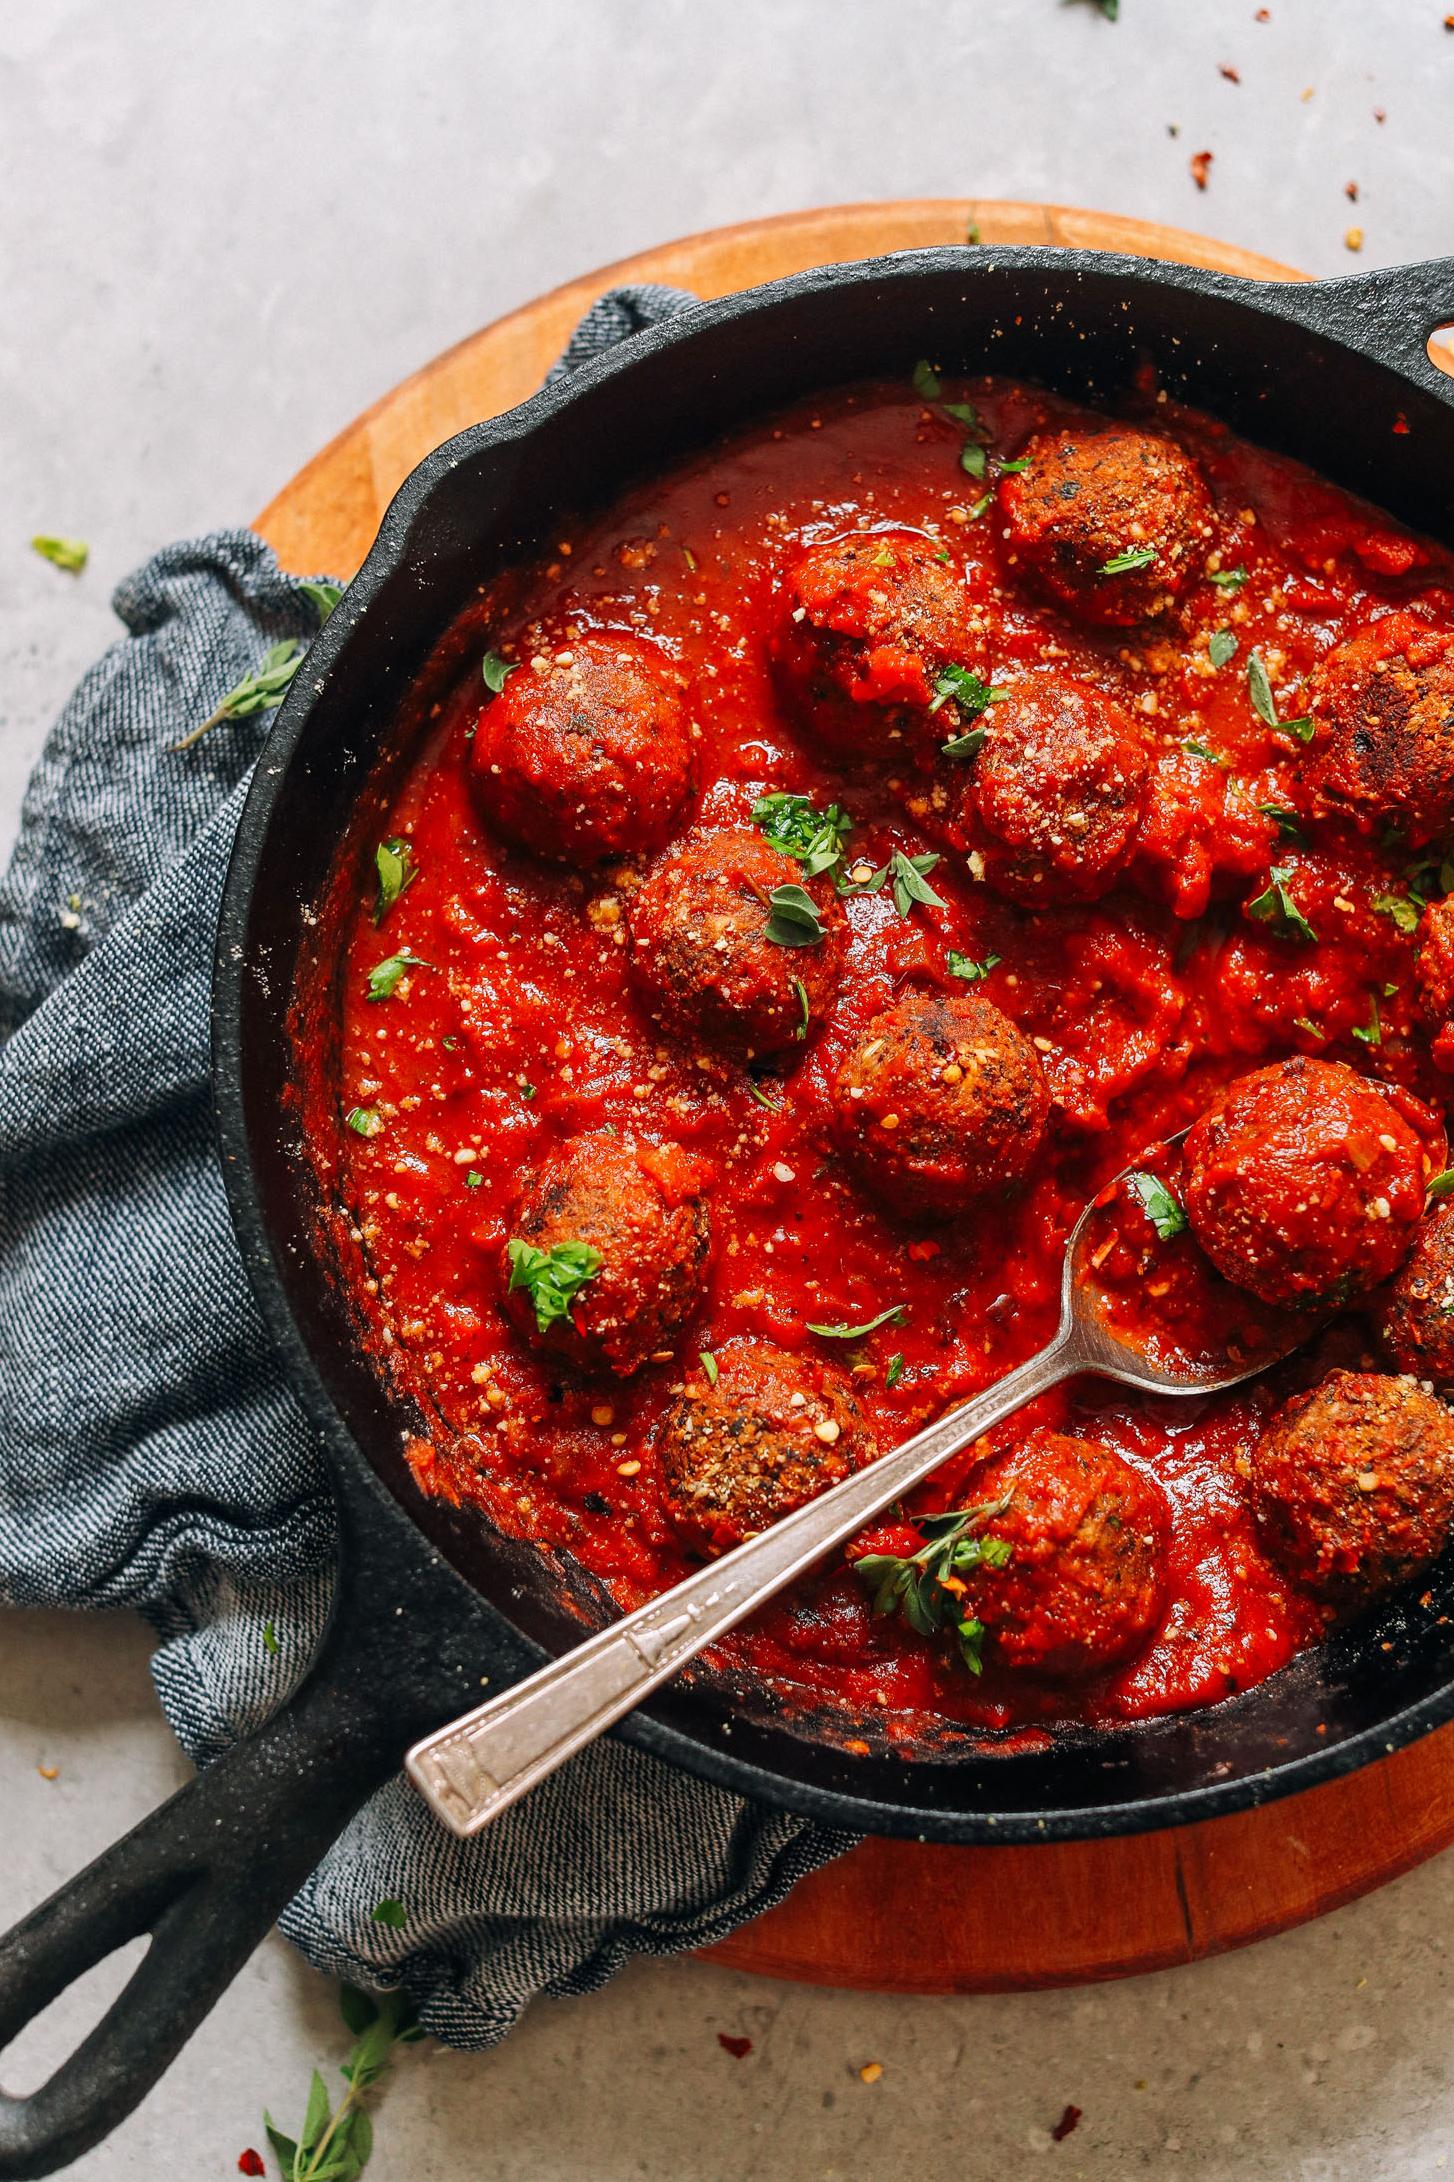  These tofu balls are meat-free and guilt-free!